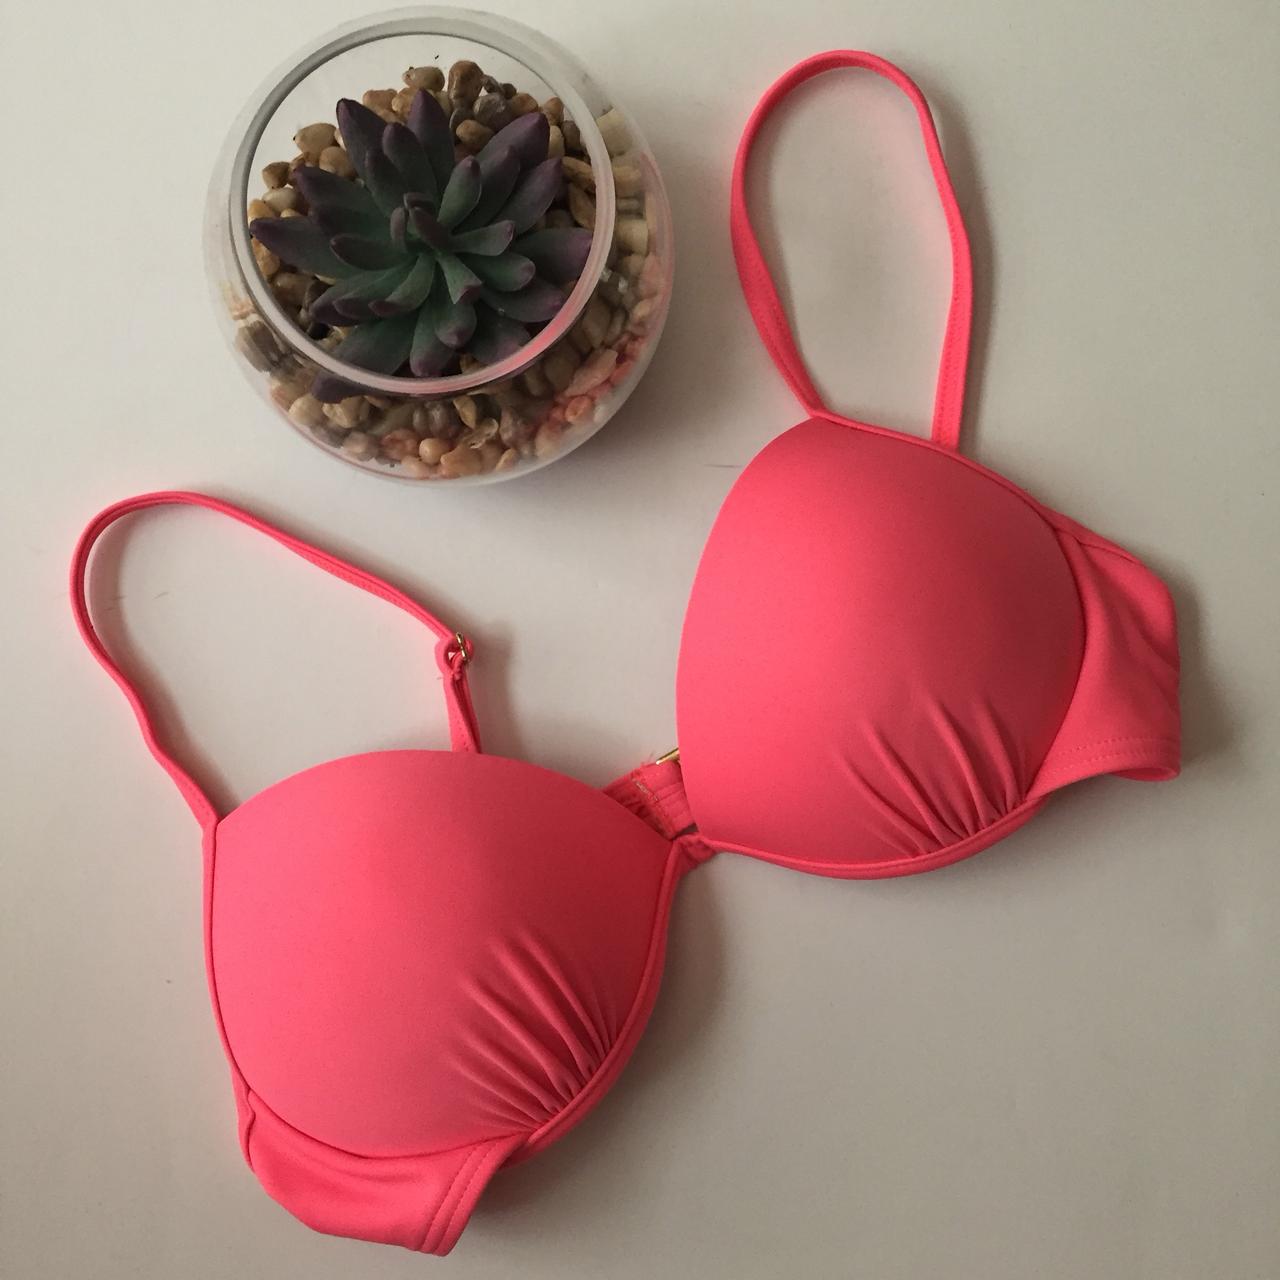 Hot pink bikini with padded bra top and tie side - Depop